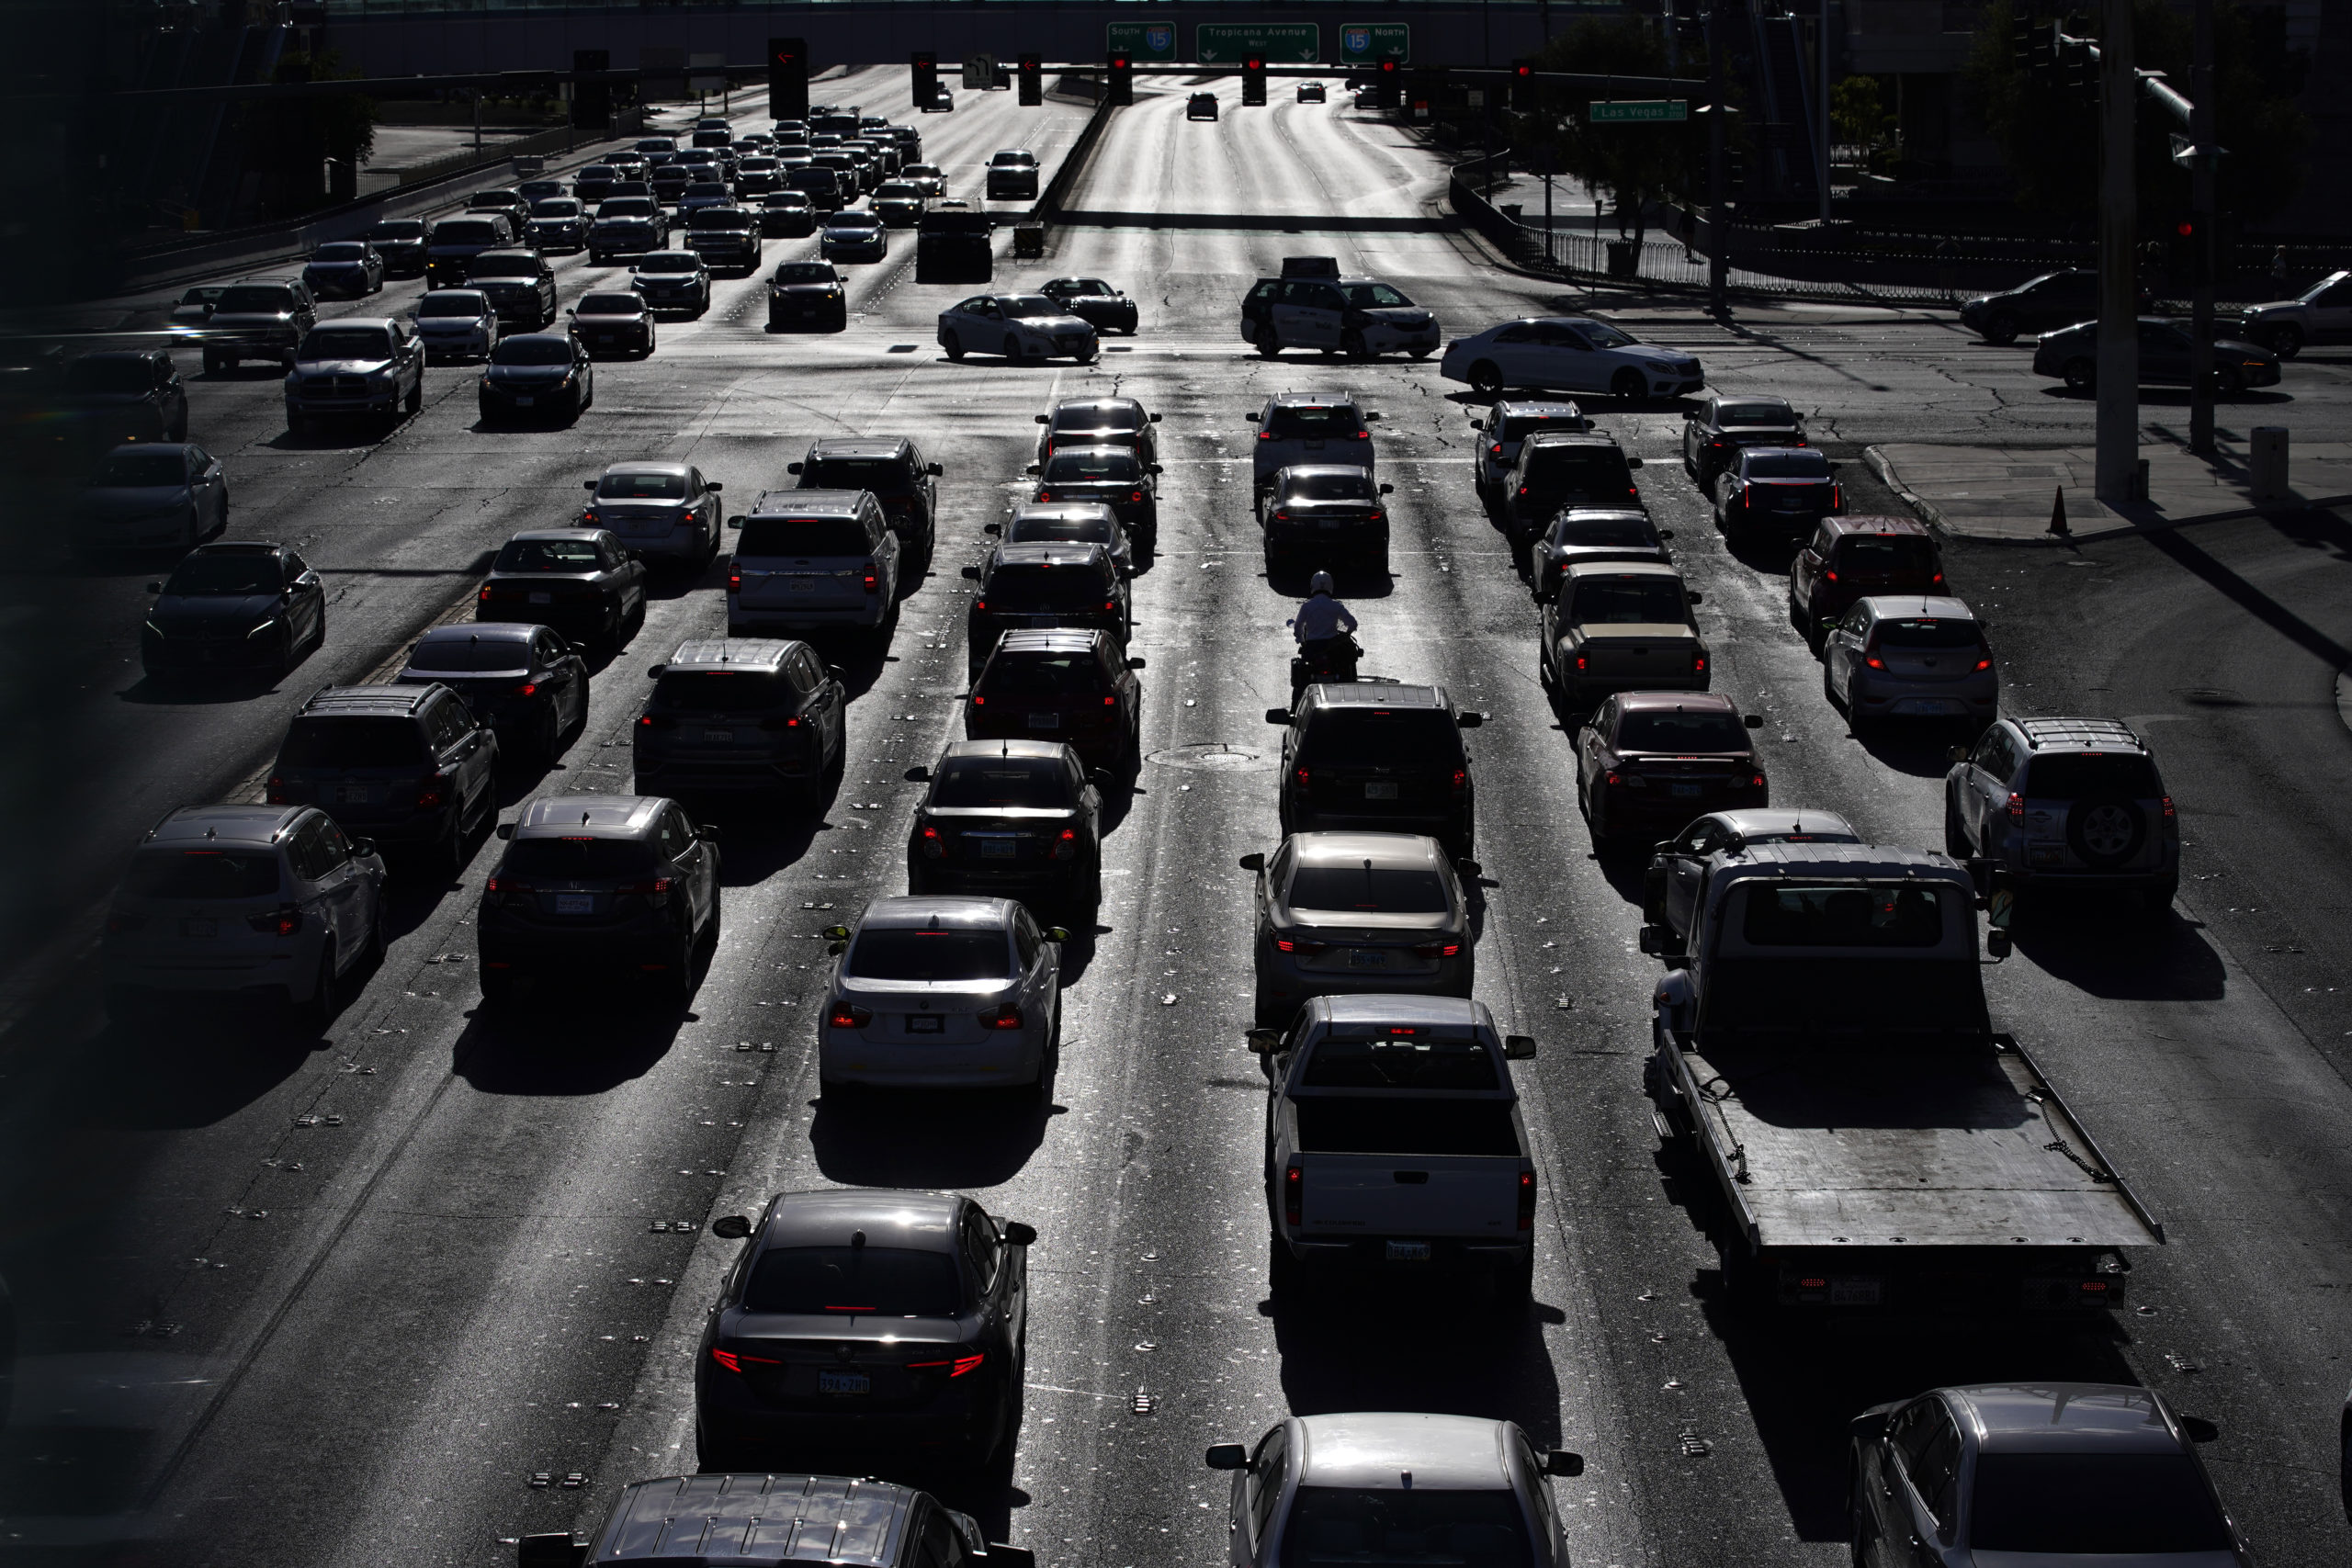 Cars wait at a red light during rush hour on the Las Vegas Strip in Las Vegas, Nevada on April 22, 2021.